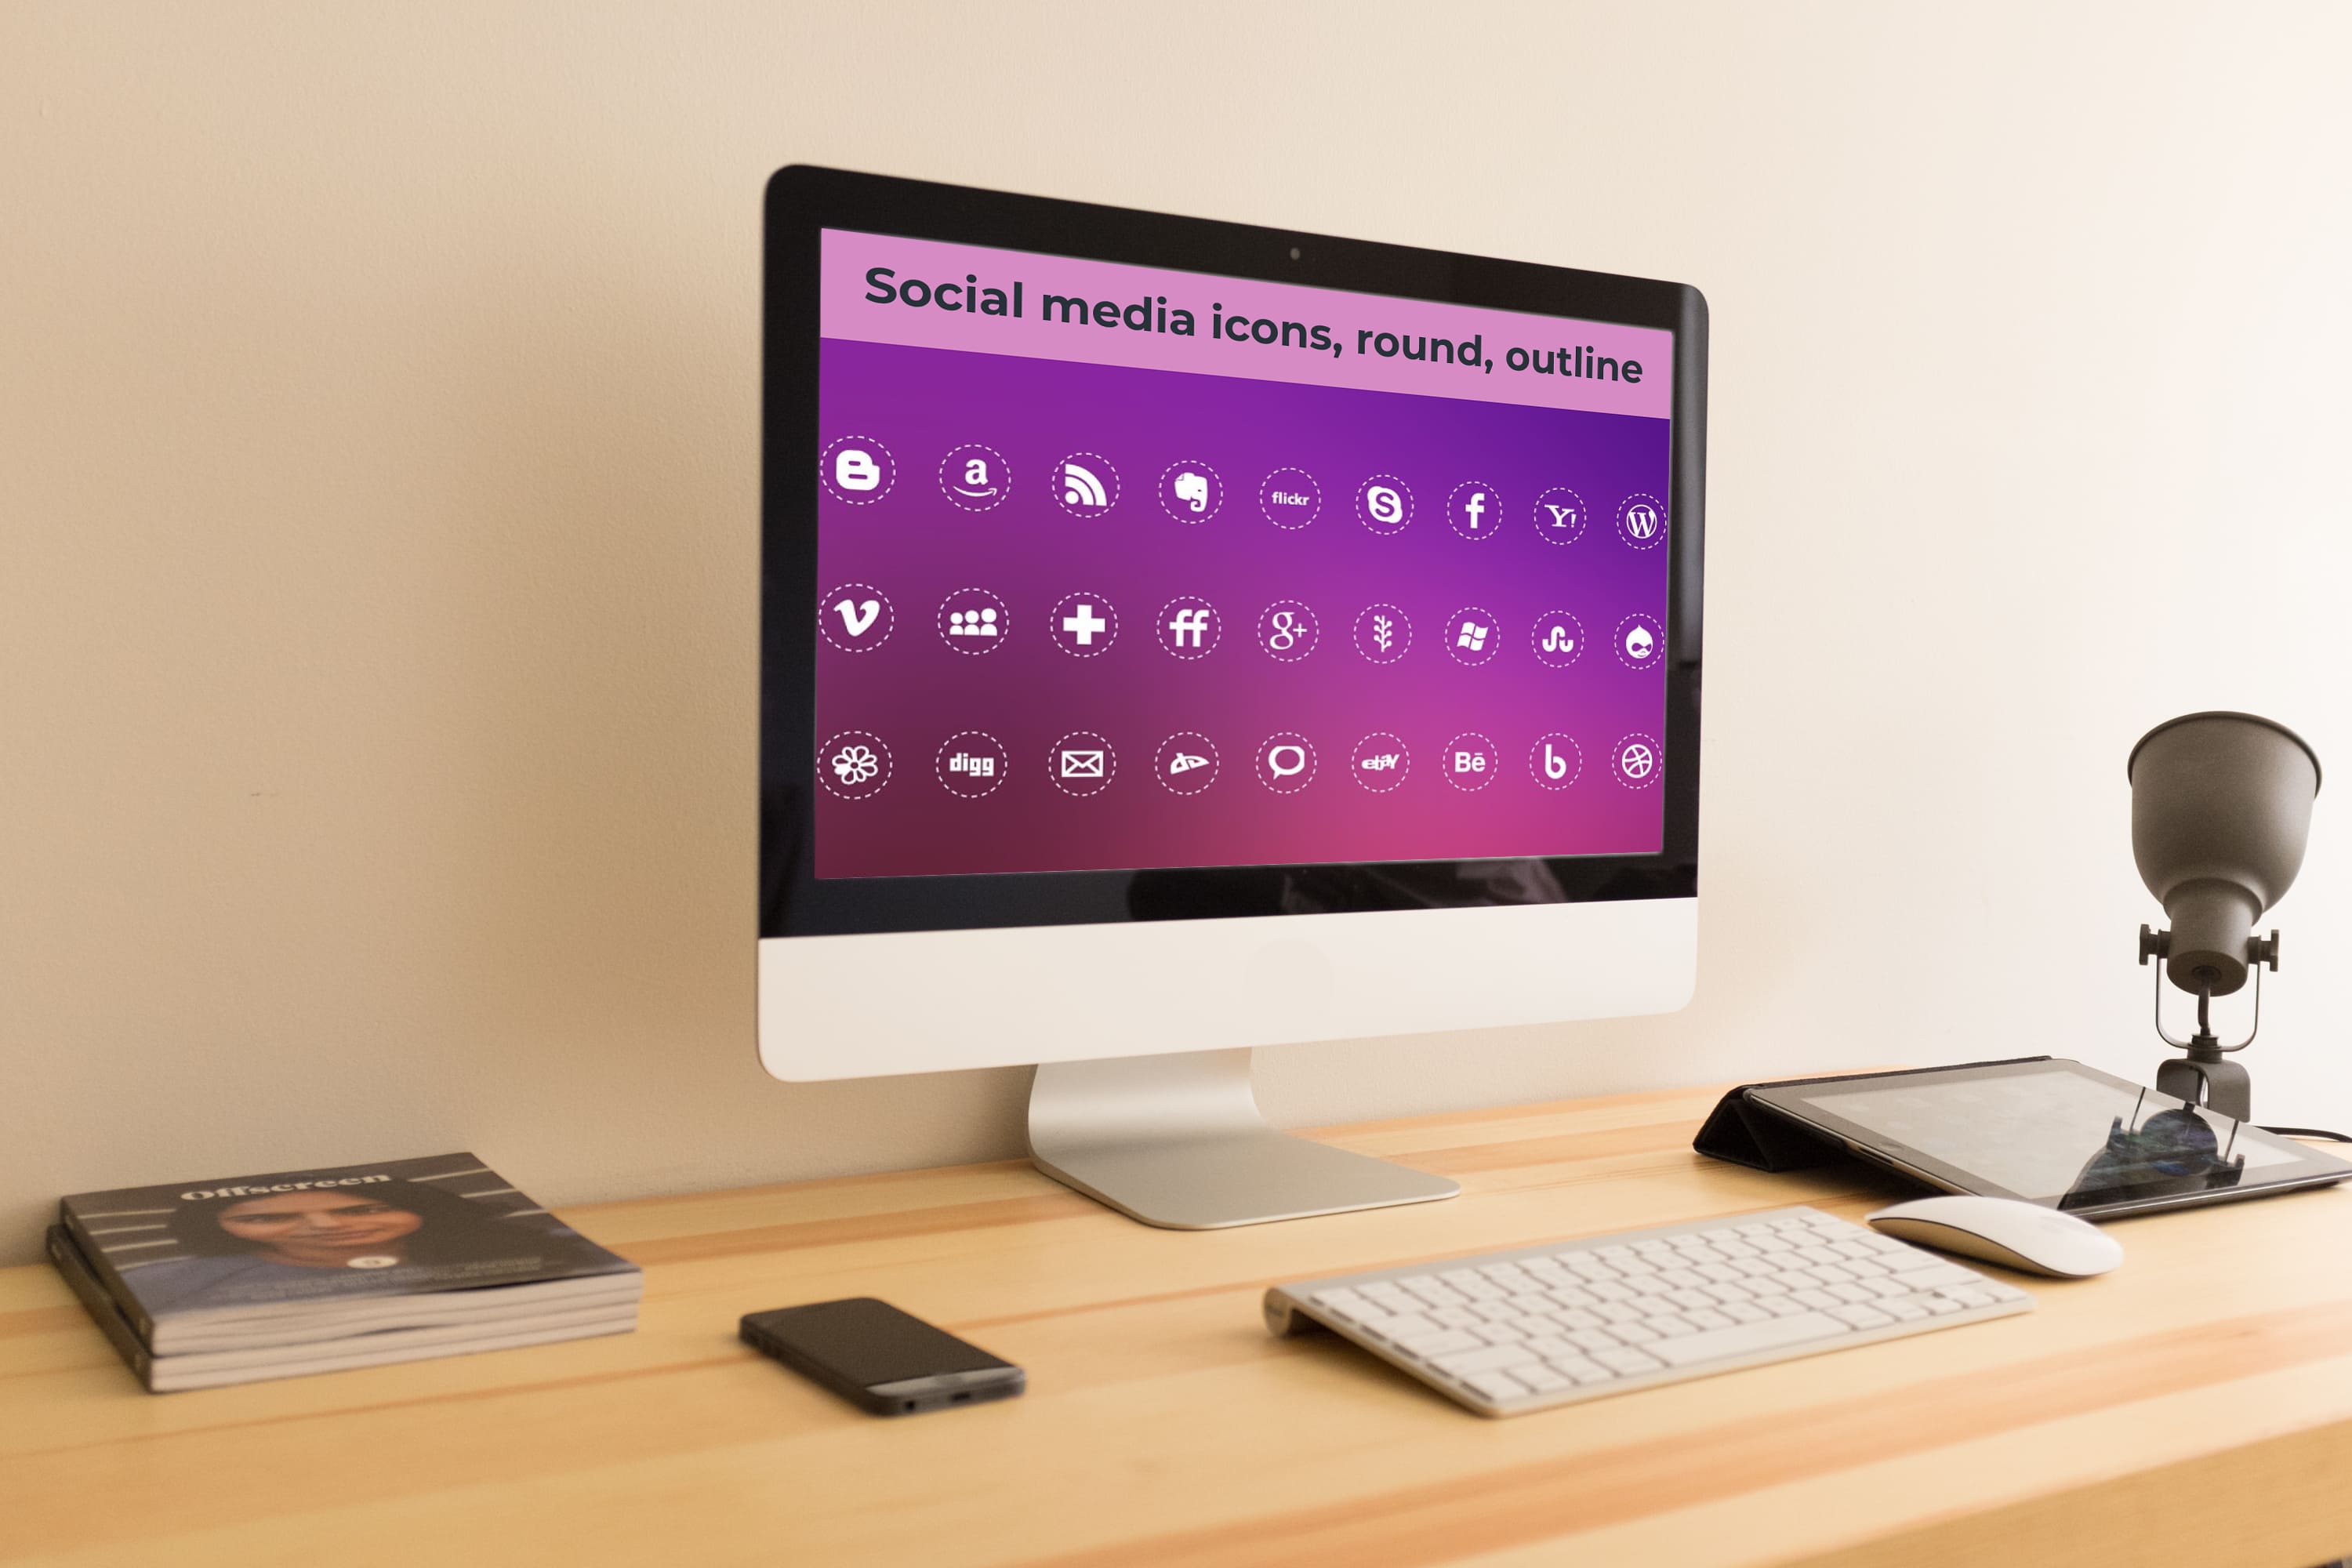 Desktop option of the Social media icons, round, outline.